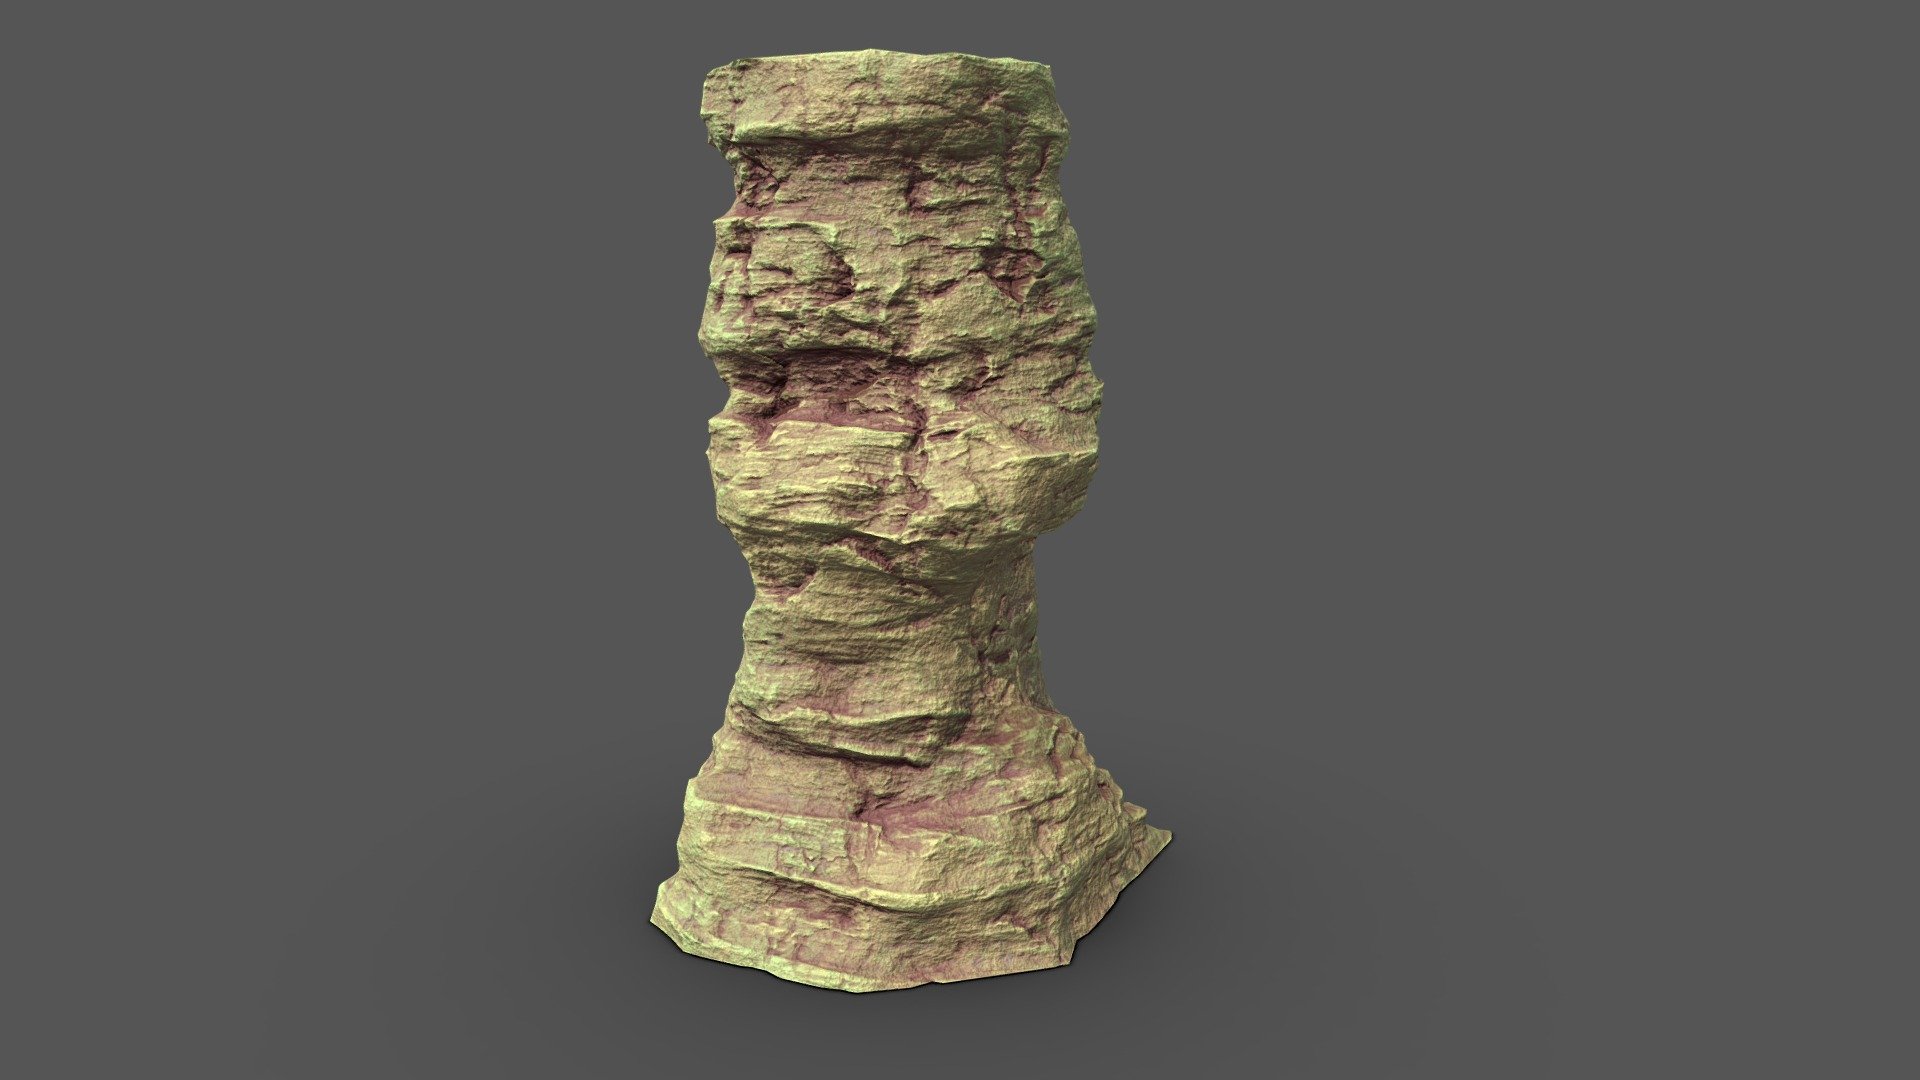 Desert Cliff low poly

Topology: Tris

Polygon count: 9722

Vertices count: 4888

Textures: Diffuse, Normal, Specular, Glossiness, Emissive, Height, Ambient Occlusion ( all in 4k resolution)

UV mapped with non-overlapping

All files are zipped in one folder. Contains 3 file formats obj, blend &amp; fbx

Useful for games, renders, background scenes and other graphical projects 3d model